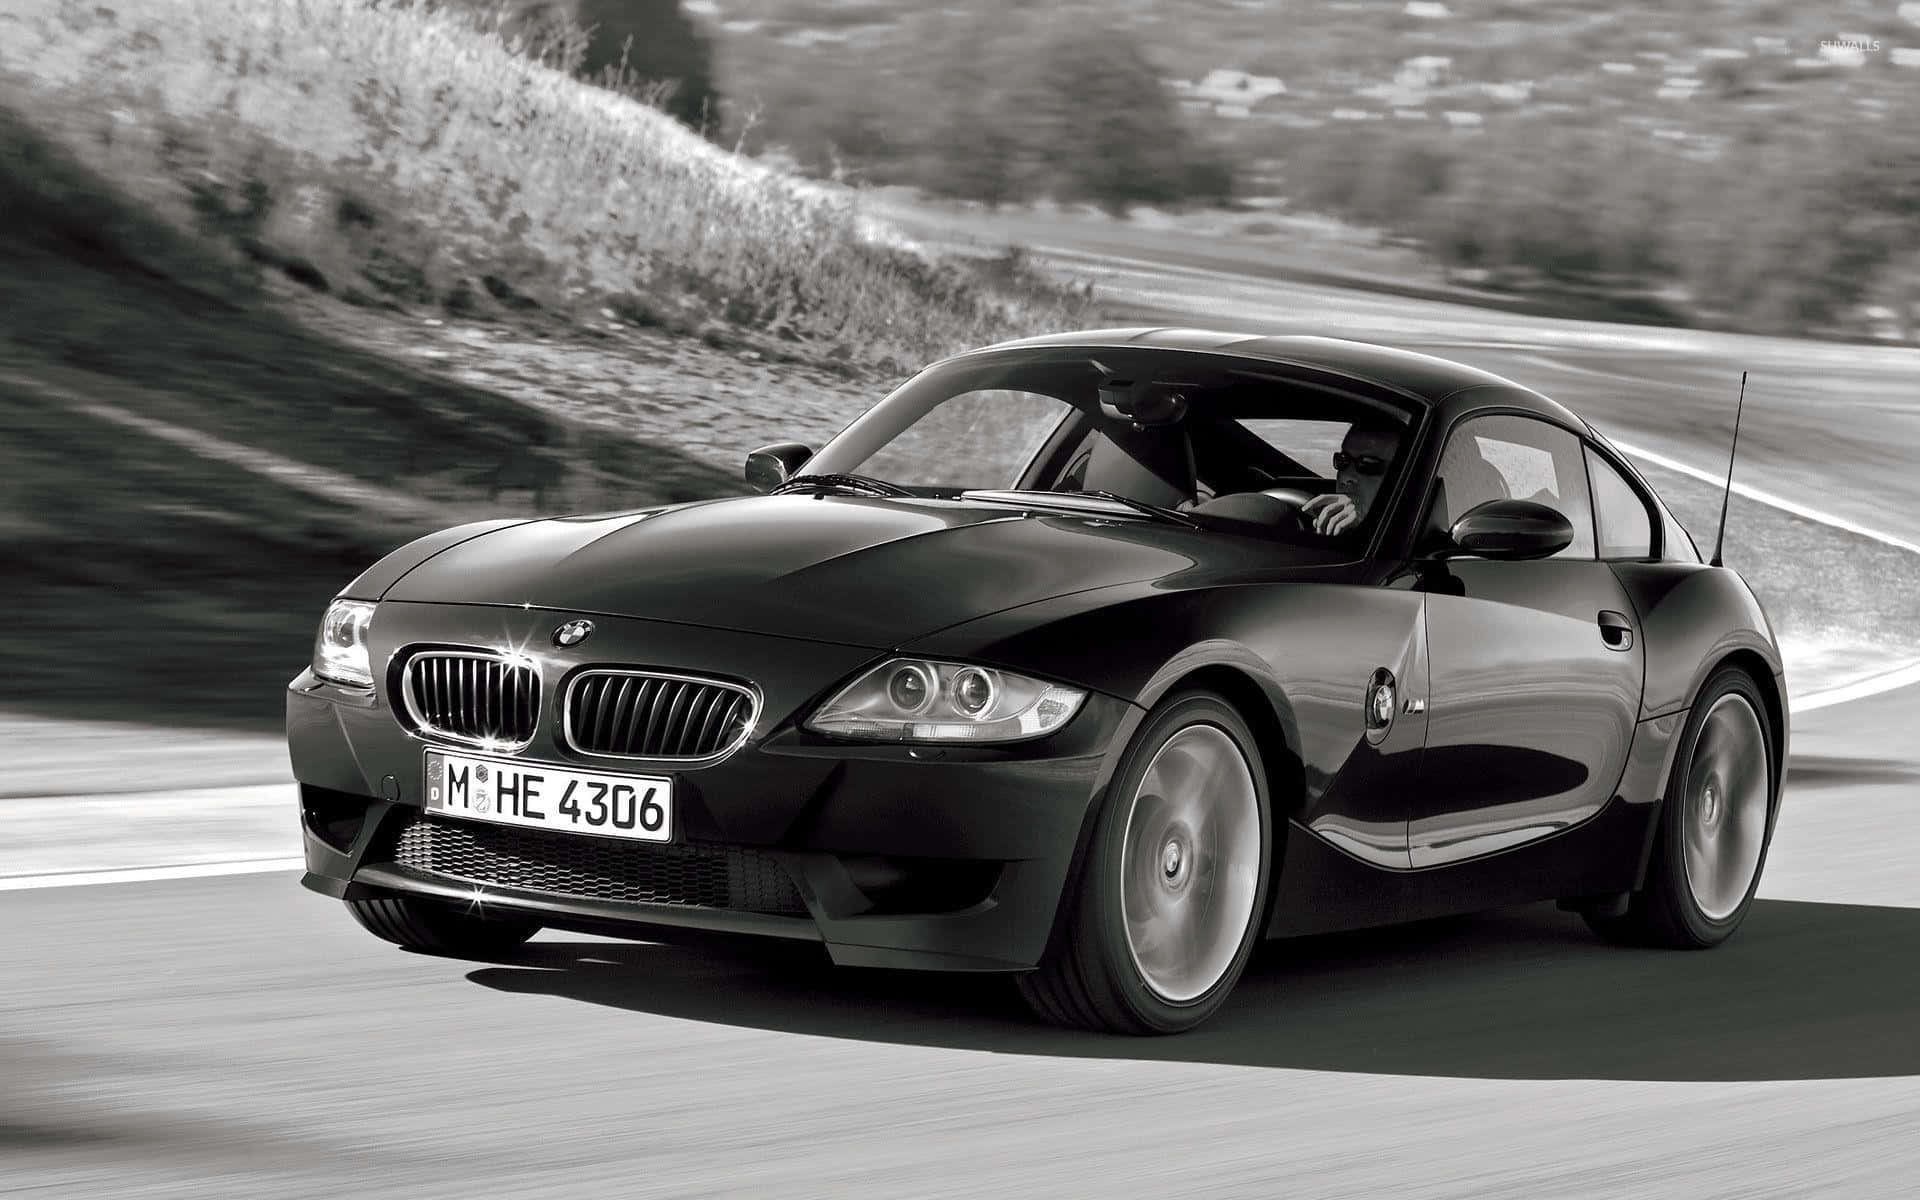 Sleek and Stylish - The BMW Z4 Roadster Wallpaper